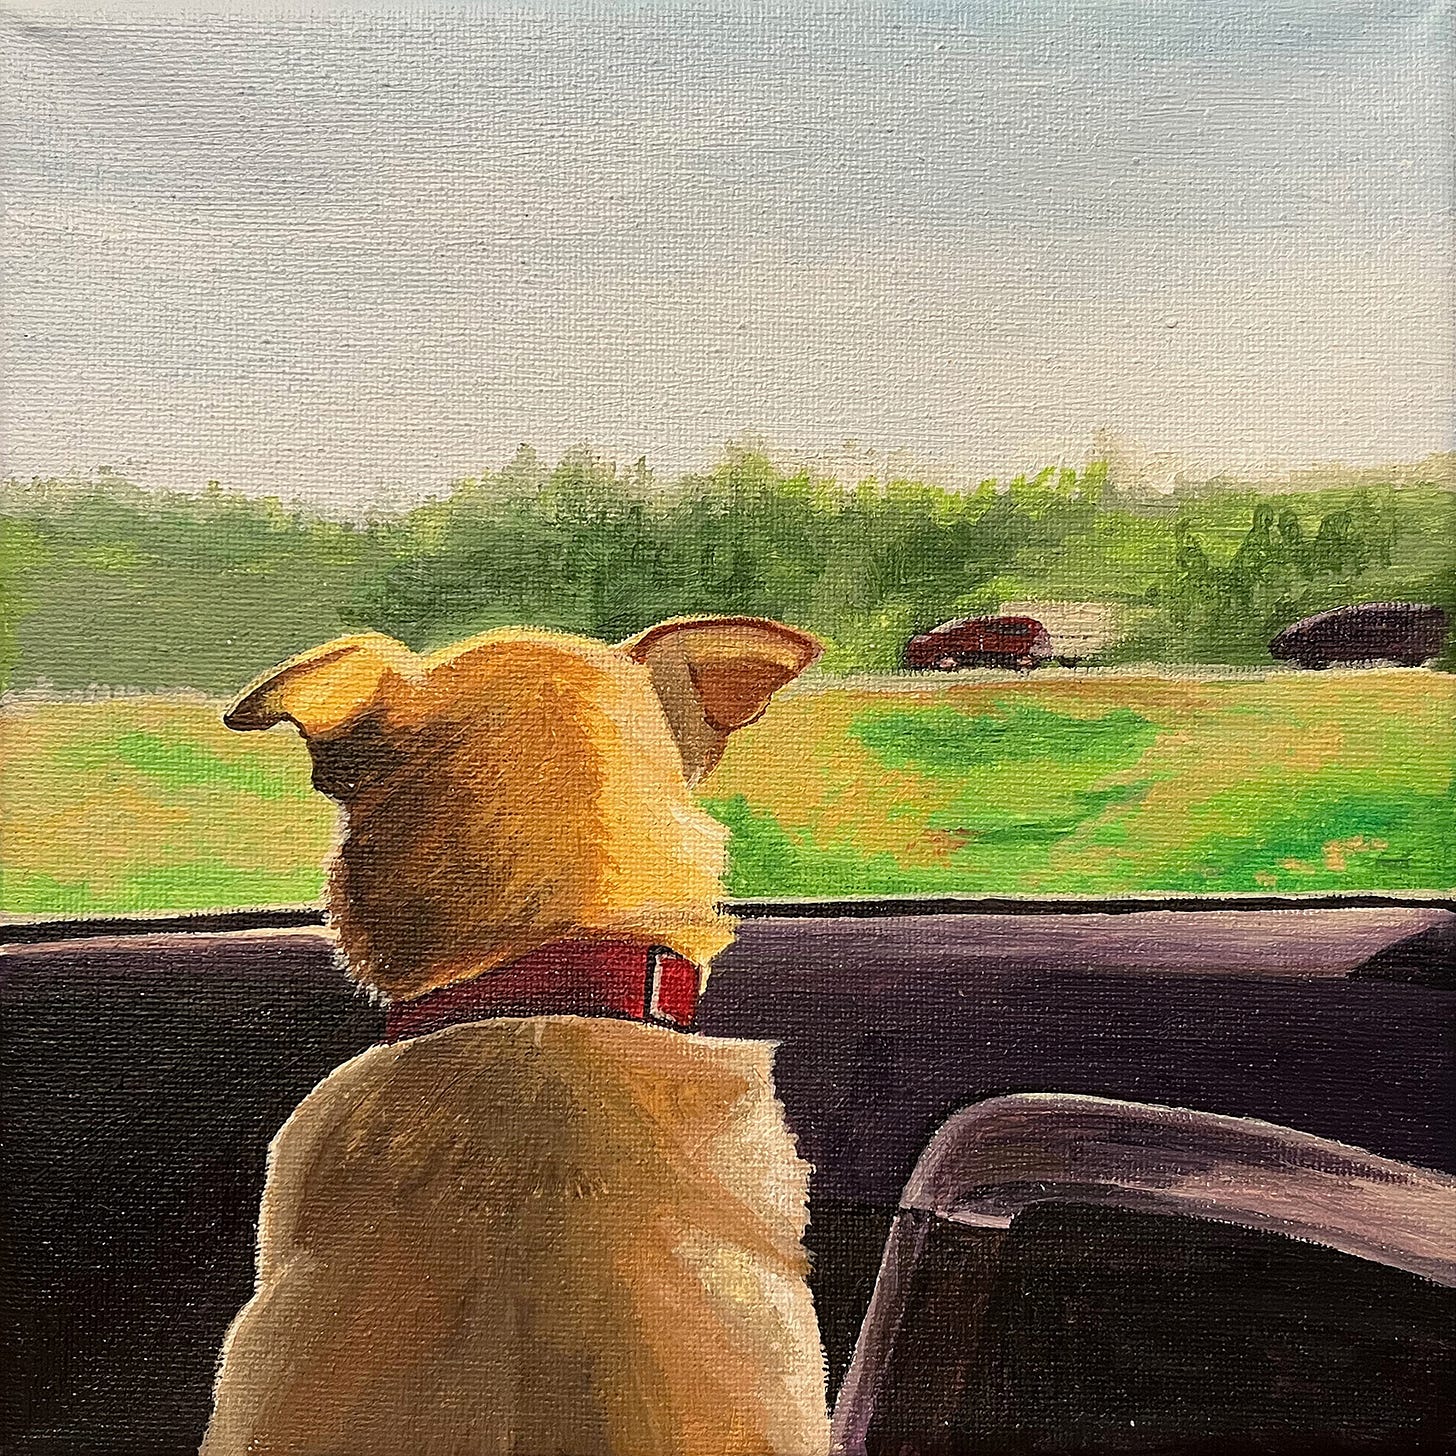 Painting of a small dog viewed from behind looking out a car window. Her fur is tan and her ears are partially flopped and stick out sideways. Outside the car there a fields and forests in muted tones under a pale blue sky.